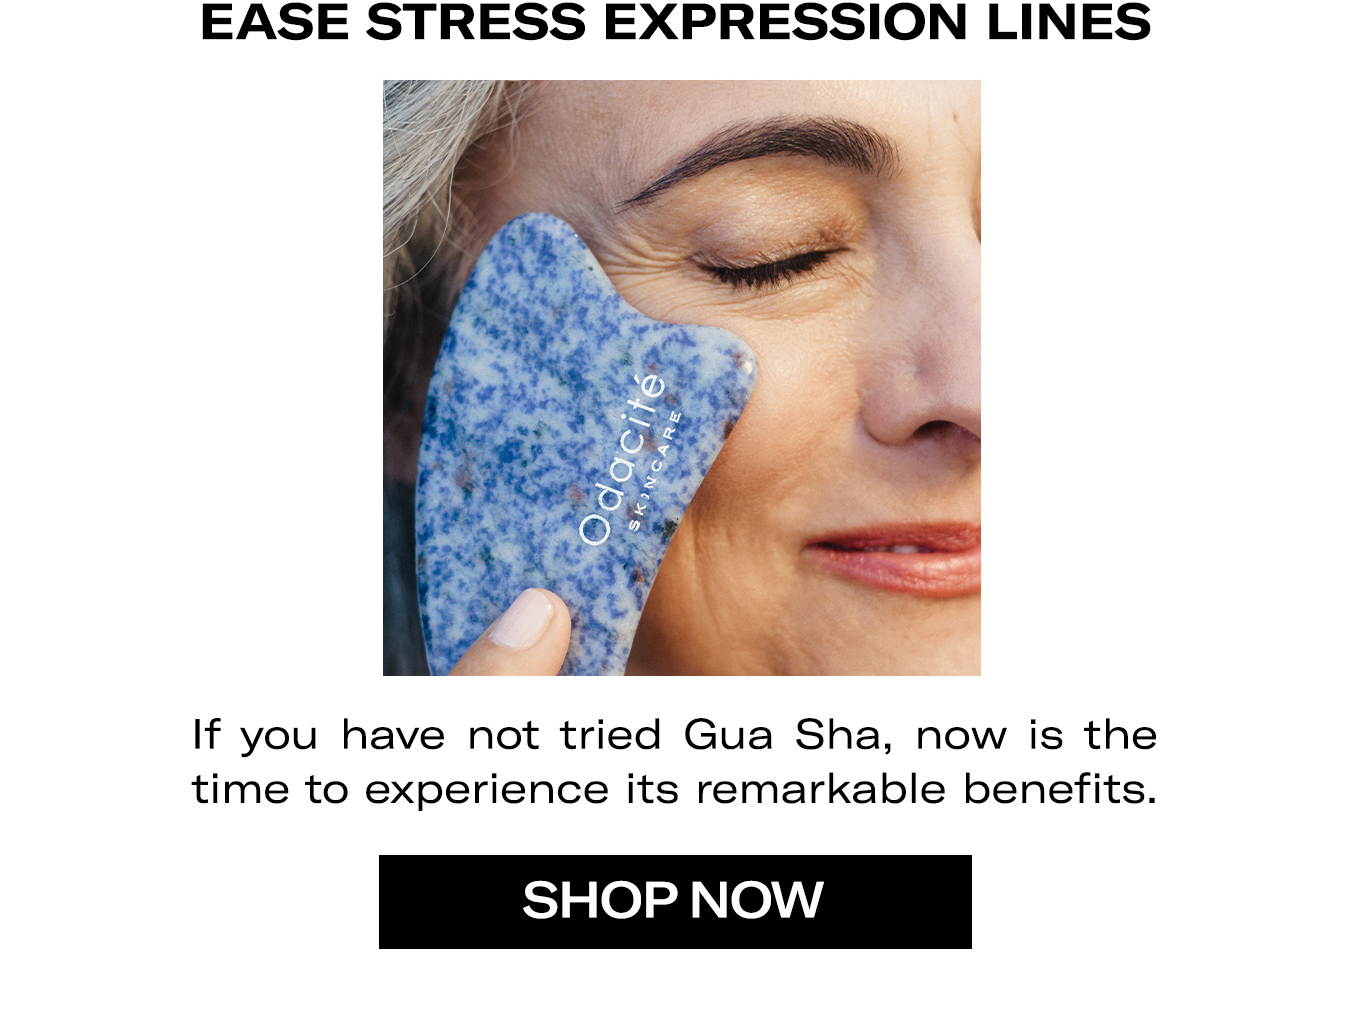 Ease Stress Expression Lines